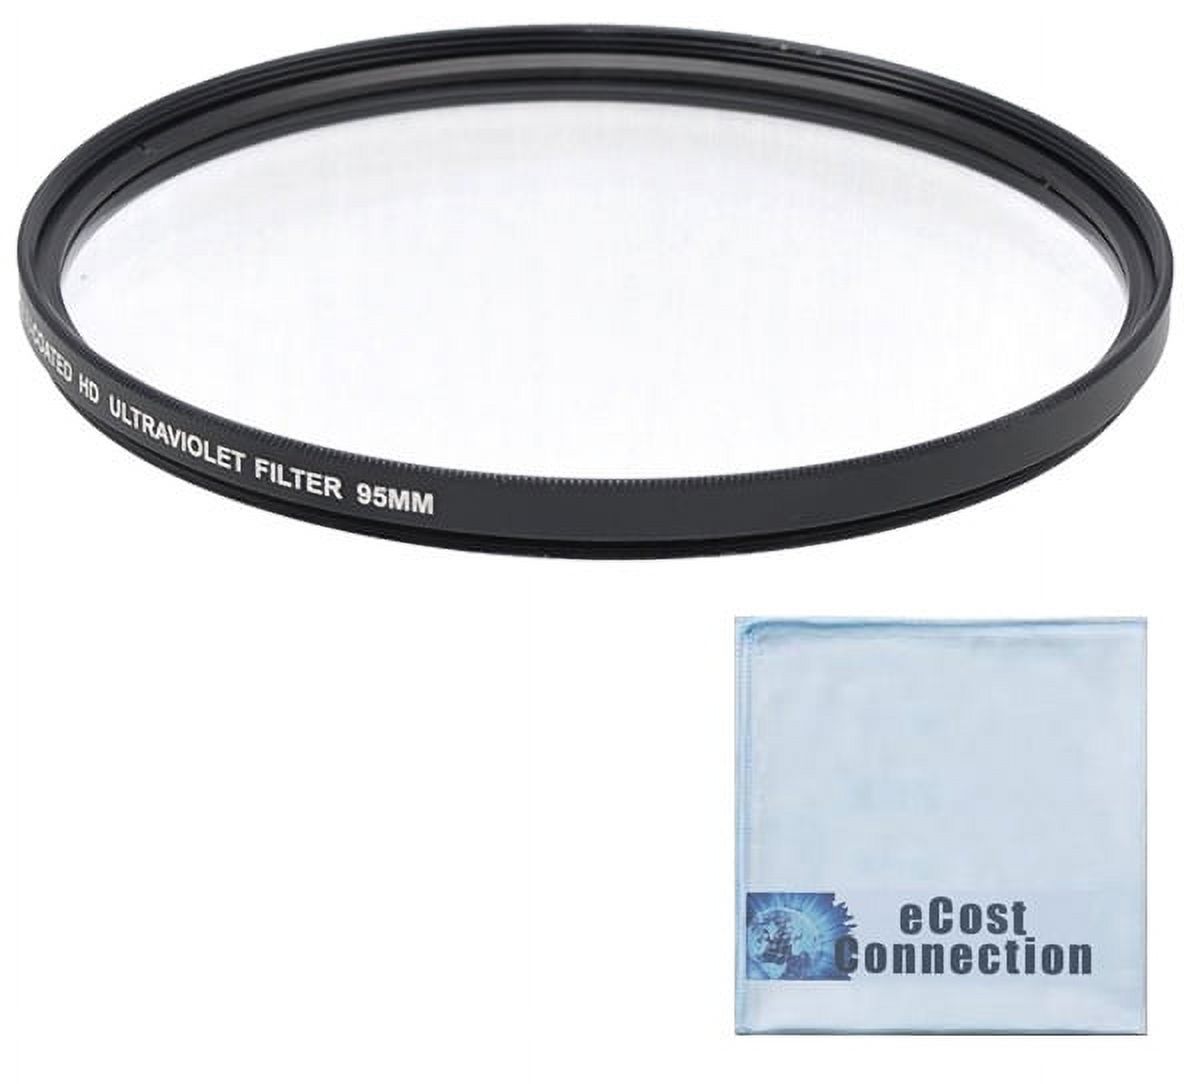 95mm Pro Series High Resolution Digital Ultraviolet UV Protection Filter for Sigma 150-600mm 50-500mm, Tamron SP 150-600mm f/5-6.3 Di VC USD Lens & an eCostConnection Microfiber Cloth - image 1 of 5